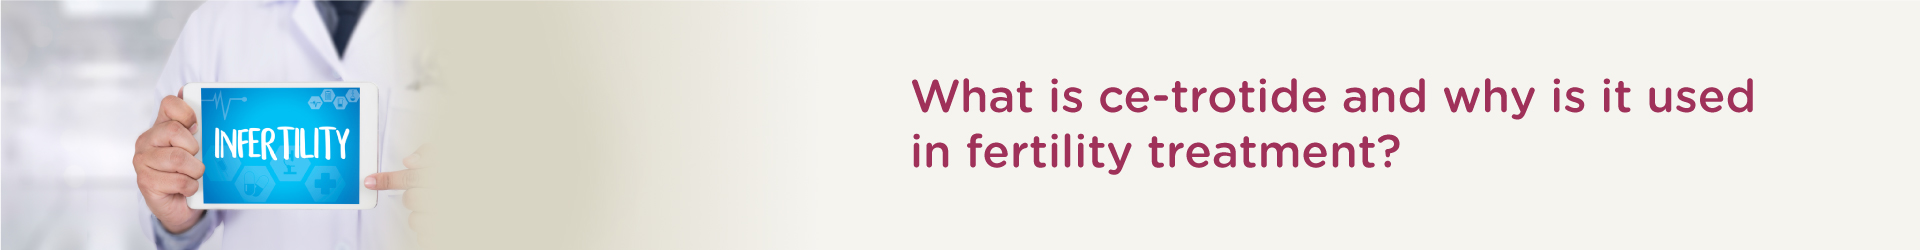 What is CETROTIDE and why it is used in fertility treatment?